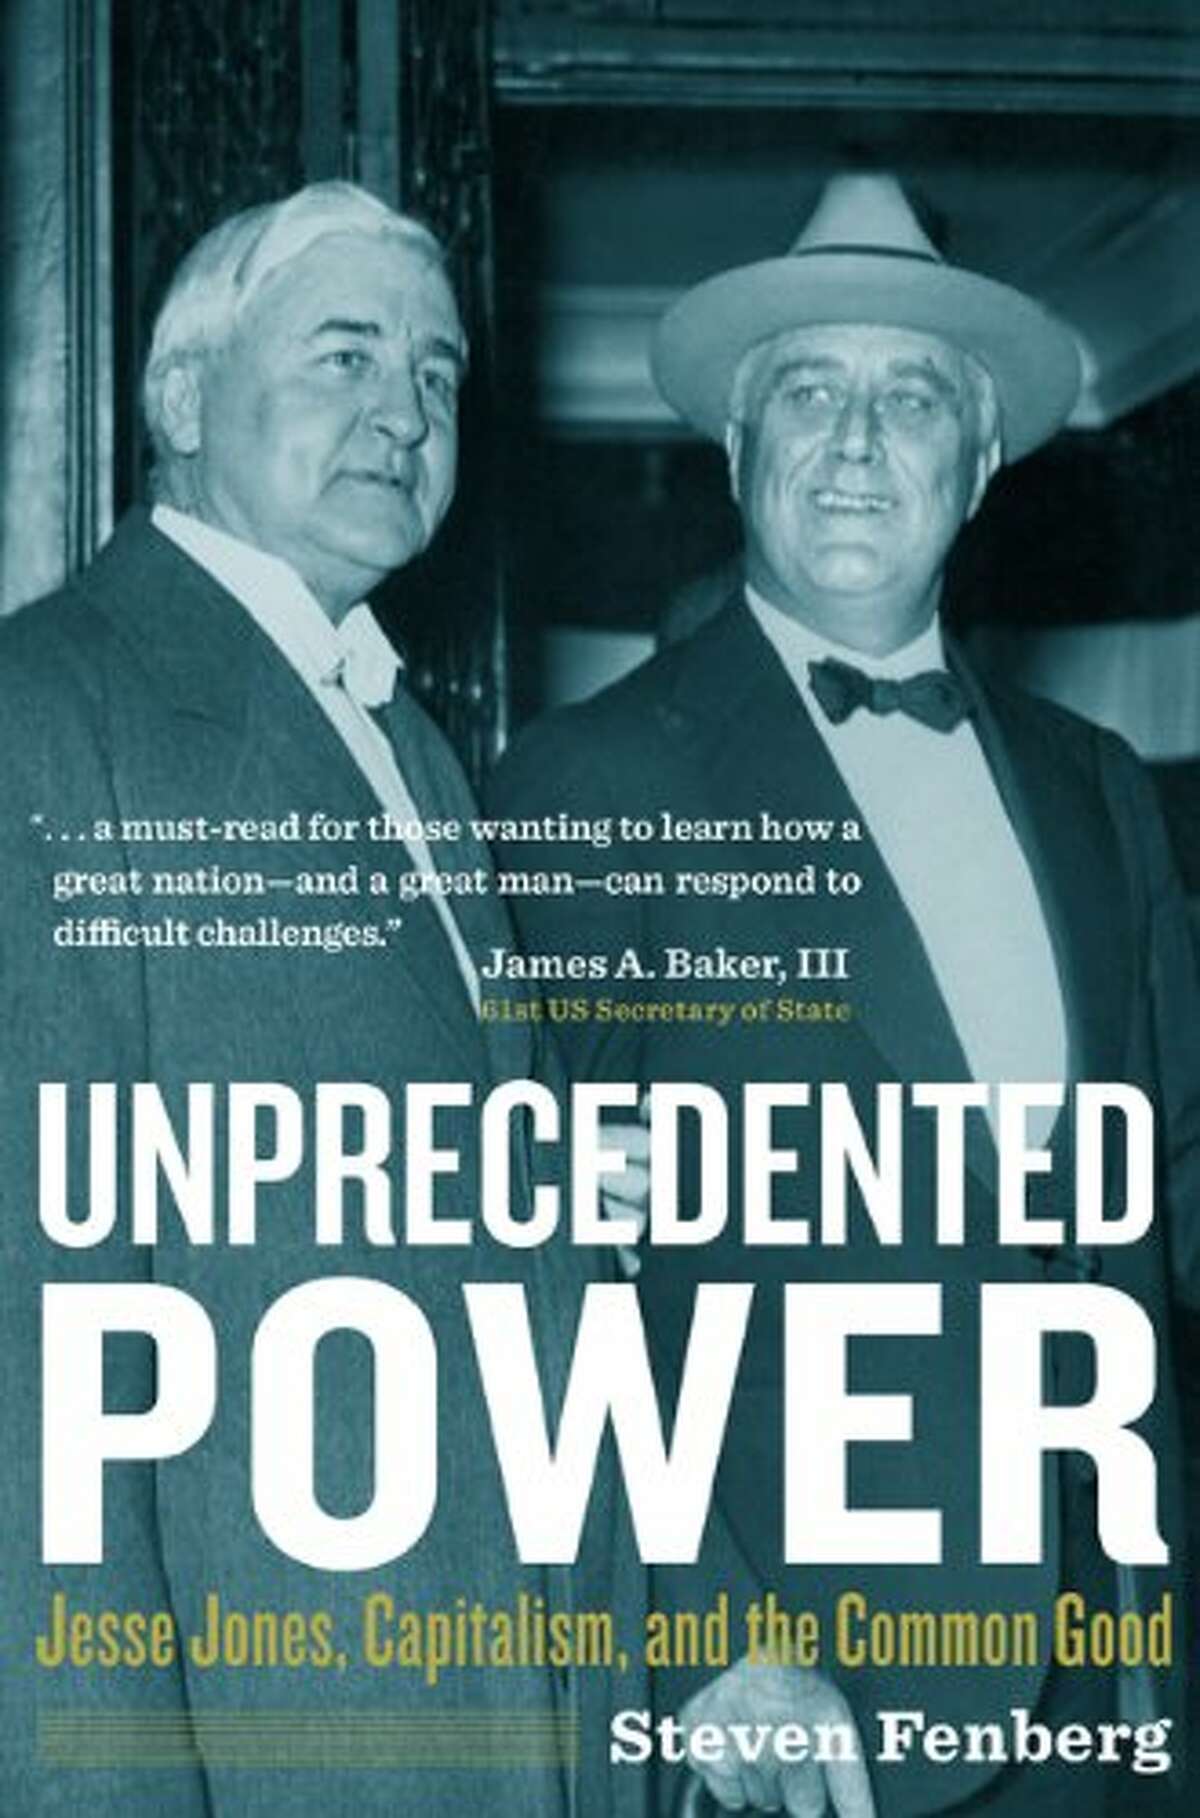 Book 2: "Unprecedented Power: Jesse Jones, Capitalism, and the Common Good" by Steven Fenberg      Fenberg’s biography tells the story of one of Houston’s most influential citizens. Jones believed that he would succeed only if his city and country did, and he helped rebuild America after the Depression “with his eye on the bottom line and on the common good.”